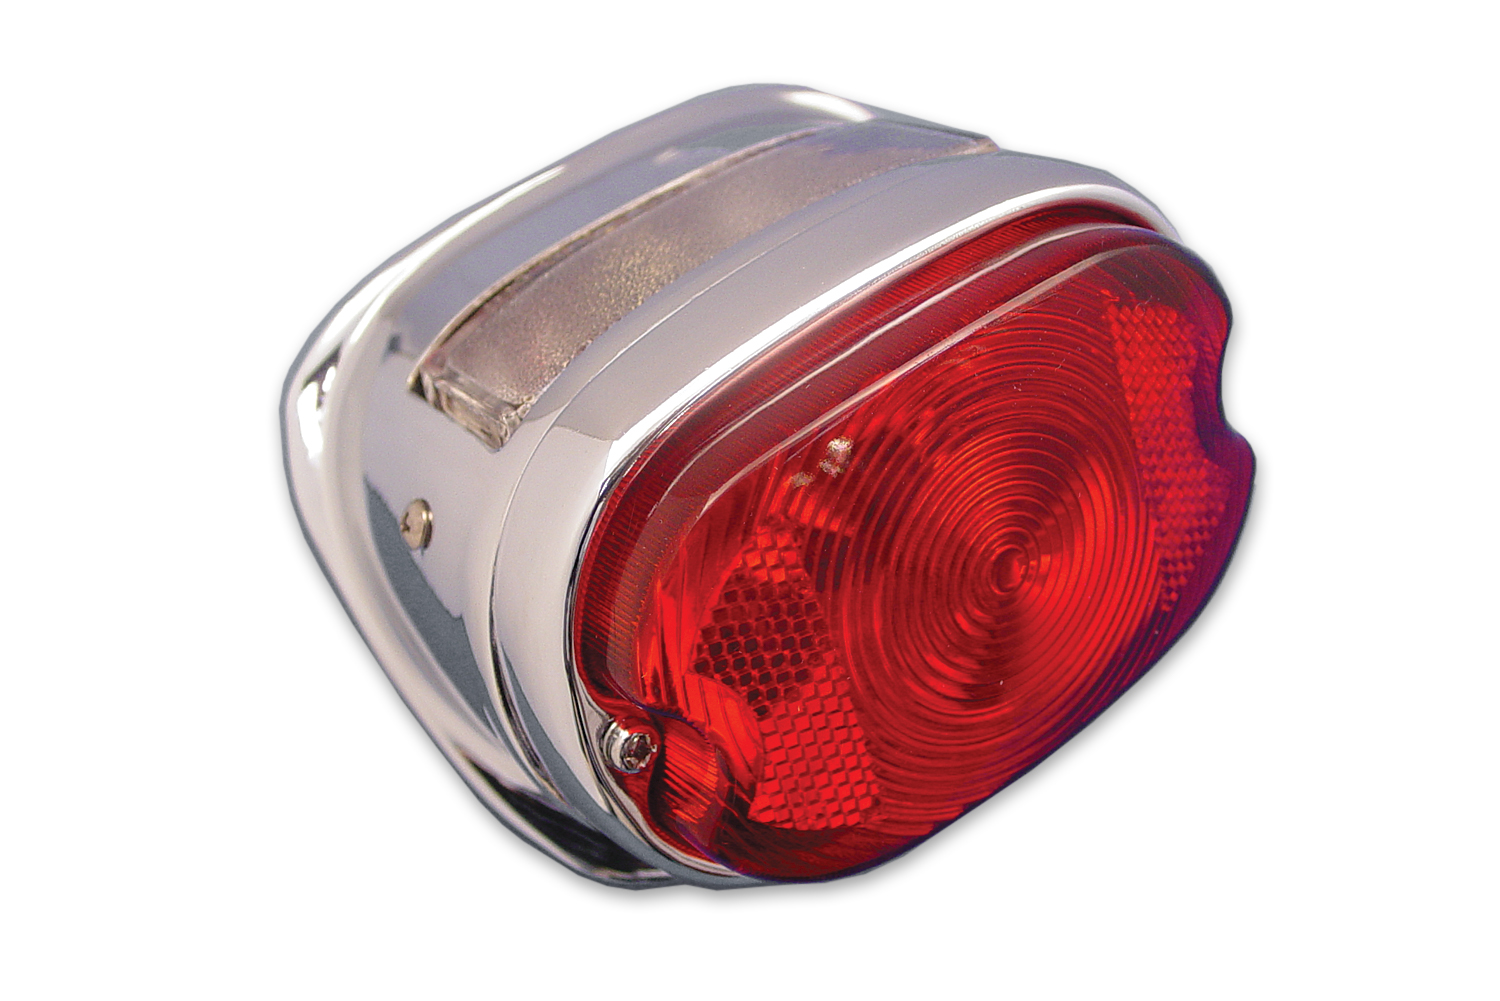 Stock Type Chrome Oval Tail Lamp